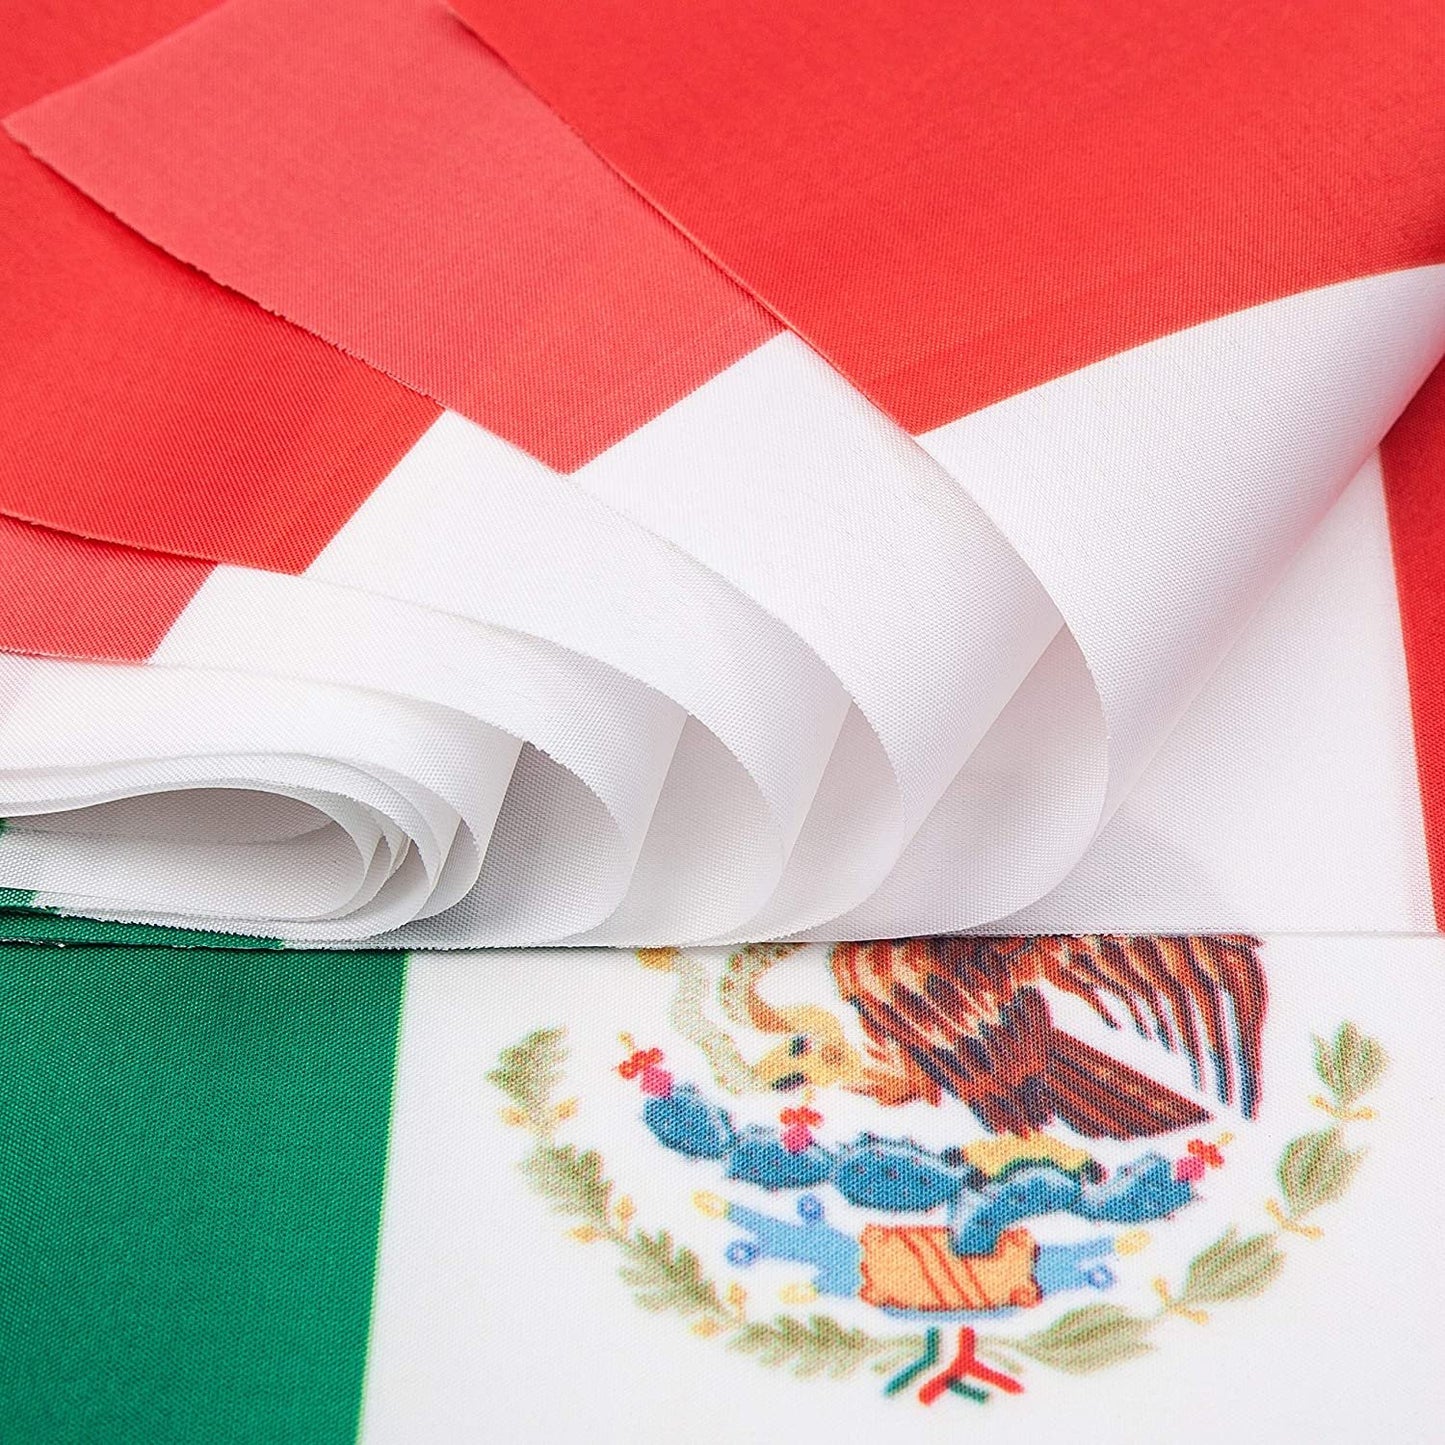 Quarterhouse Mexico Flags - 20 Flags Per String (Repeating) - Polyester, 8 x 12 Inches